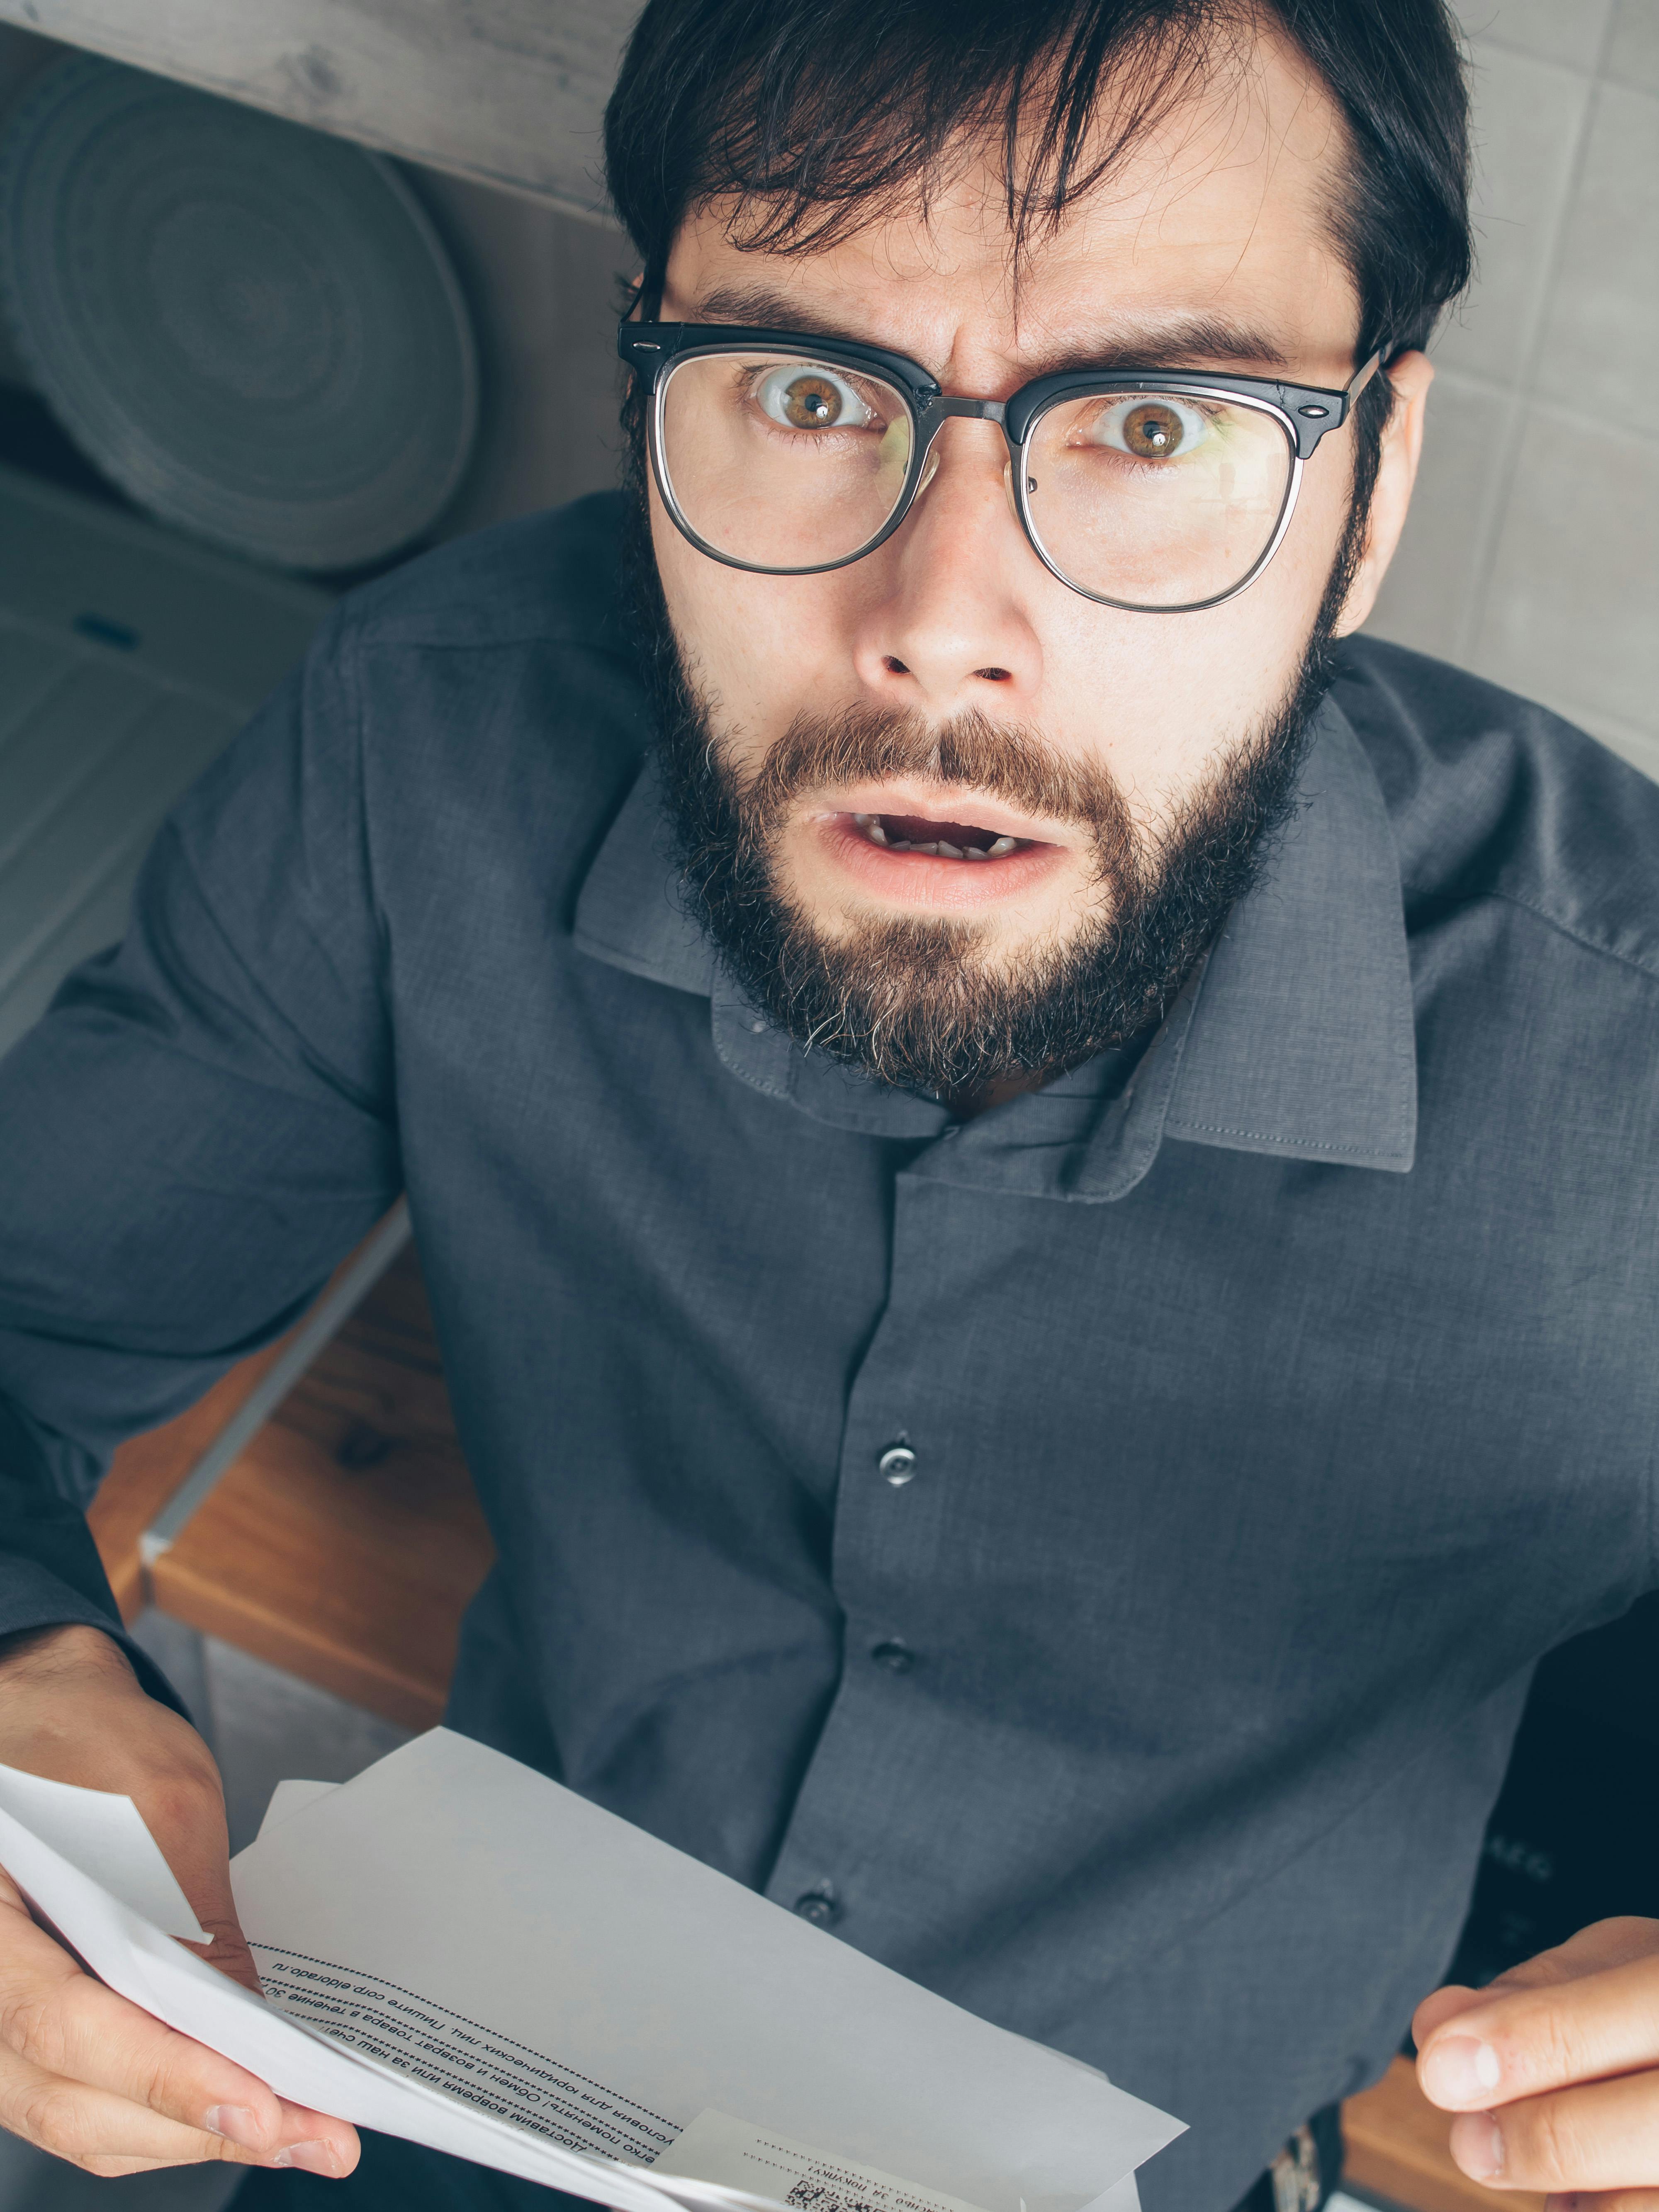 A shocked man holding a document | Source: Pexels